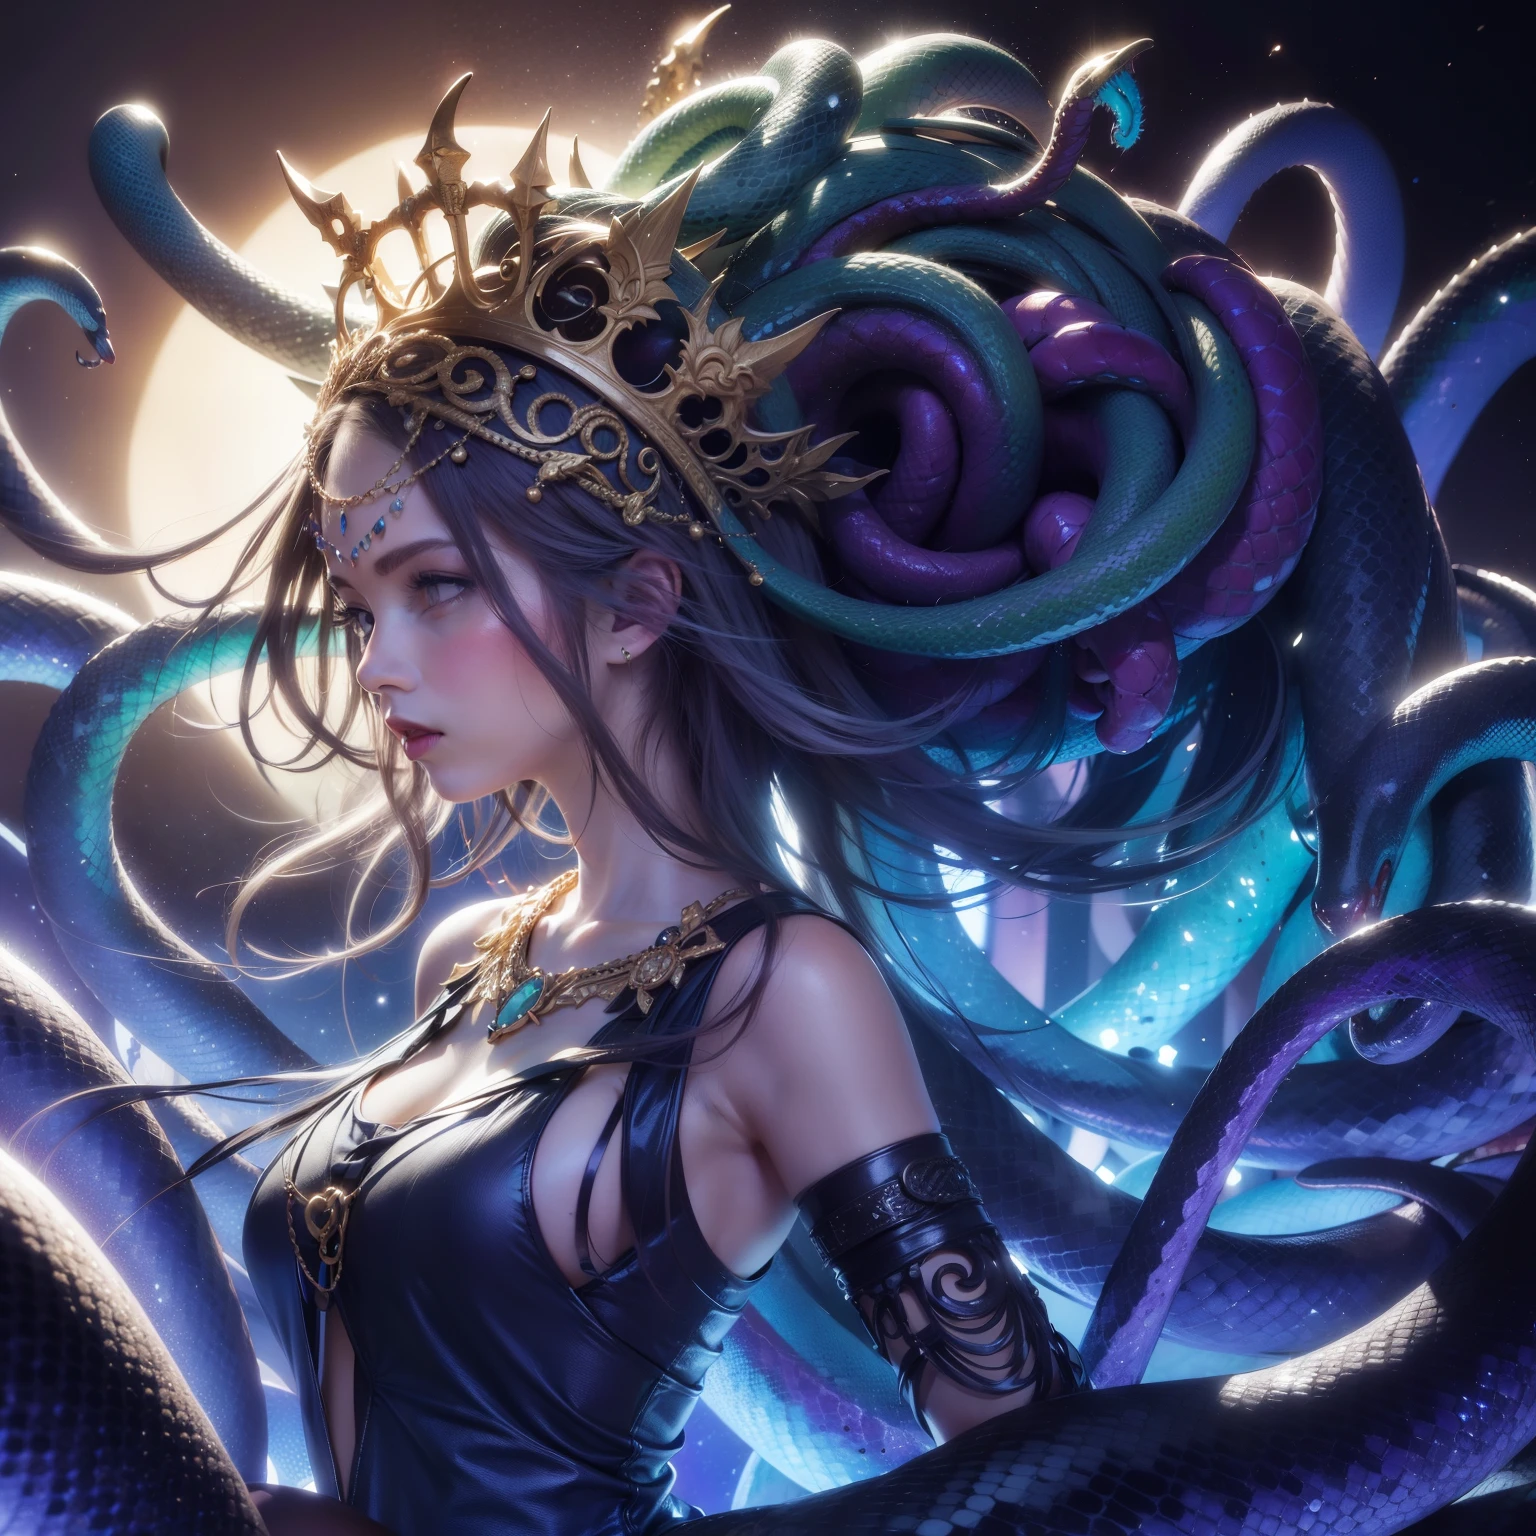 (A woman with the body and head of a large amount of thin snakes growing out of her hair.), (Two snakes staring at you from the upper left:1.2、eyes are shining、Reptile scales)、(A confident and bullish look:1.3)、A woman looking up slightly、cold emerald eyes、Cold-blooded face、Smile、thin lips、the corners of the mouth slightly raised、(highest quality,4K,8K,High resolution,masterpiece:1.2),Super detailed,(realistic,photorealistic,photo-realistic:1.37),side view、Two snake heads staring straight ahead from the top left、Night sky and big full moon in the background、 silver hair、Delicate gold hair ornament、Gold crown、night sky、gold necklace、fierce Medusa, female Medusa long hair, small details.  shiny skin、Medusa, many snakes, There are many thin snakes in her hair., male Medusa, long flowing Medusa hair, goddess, eldritch goddess, Medusa,